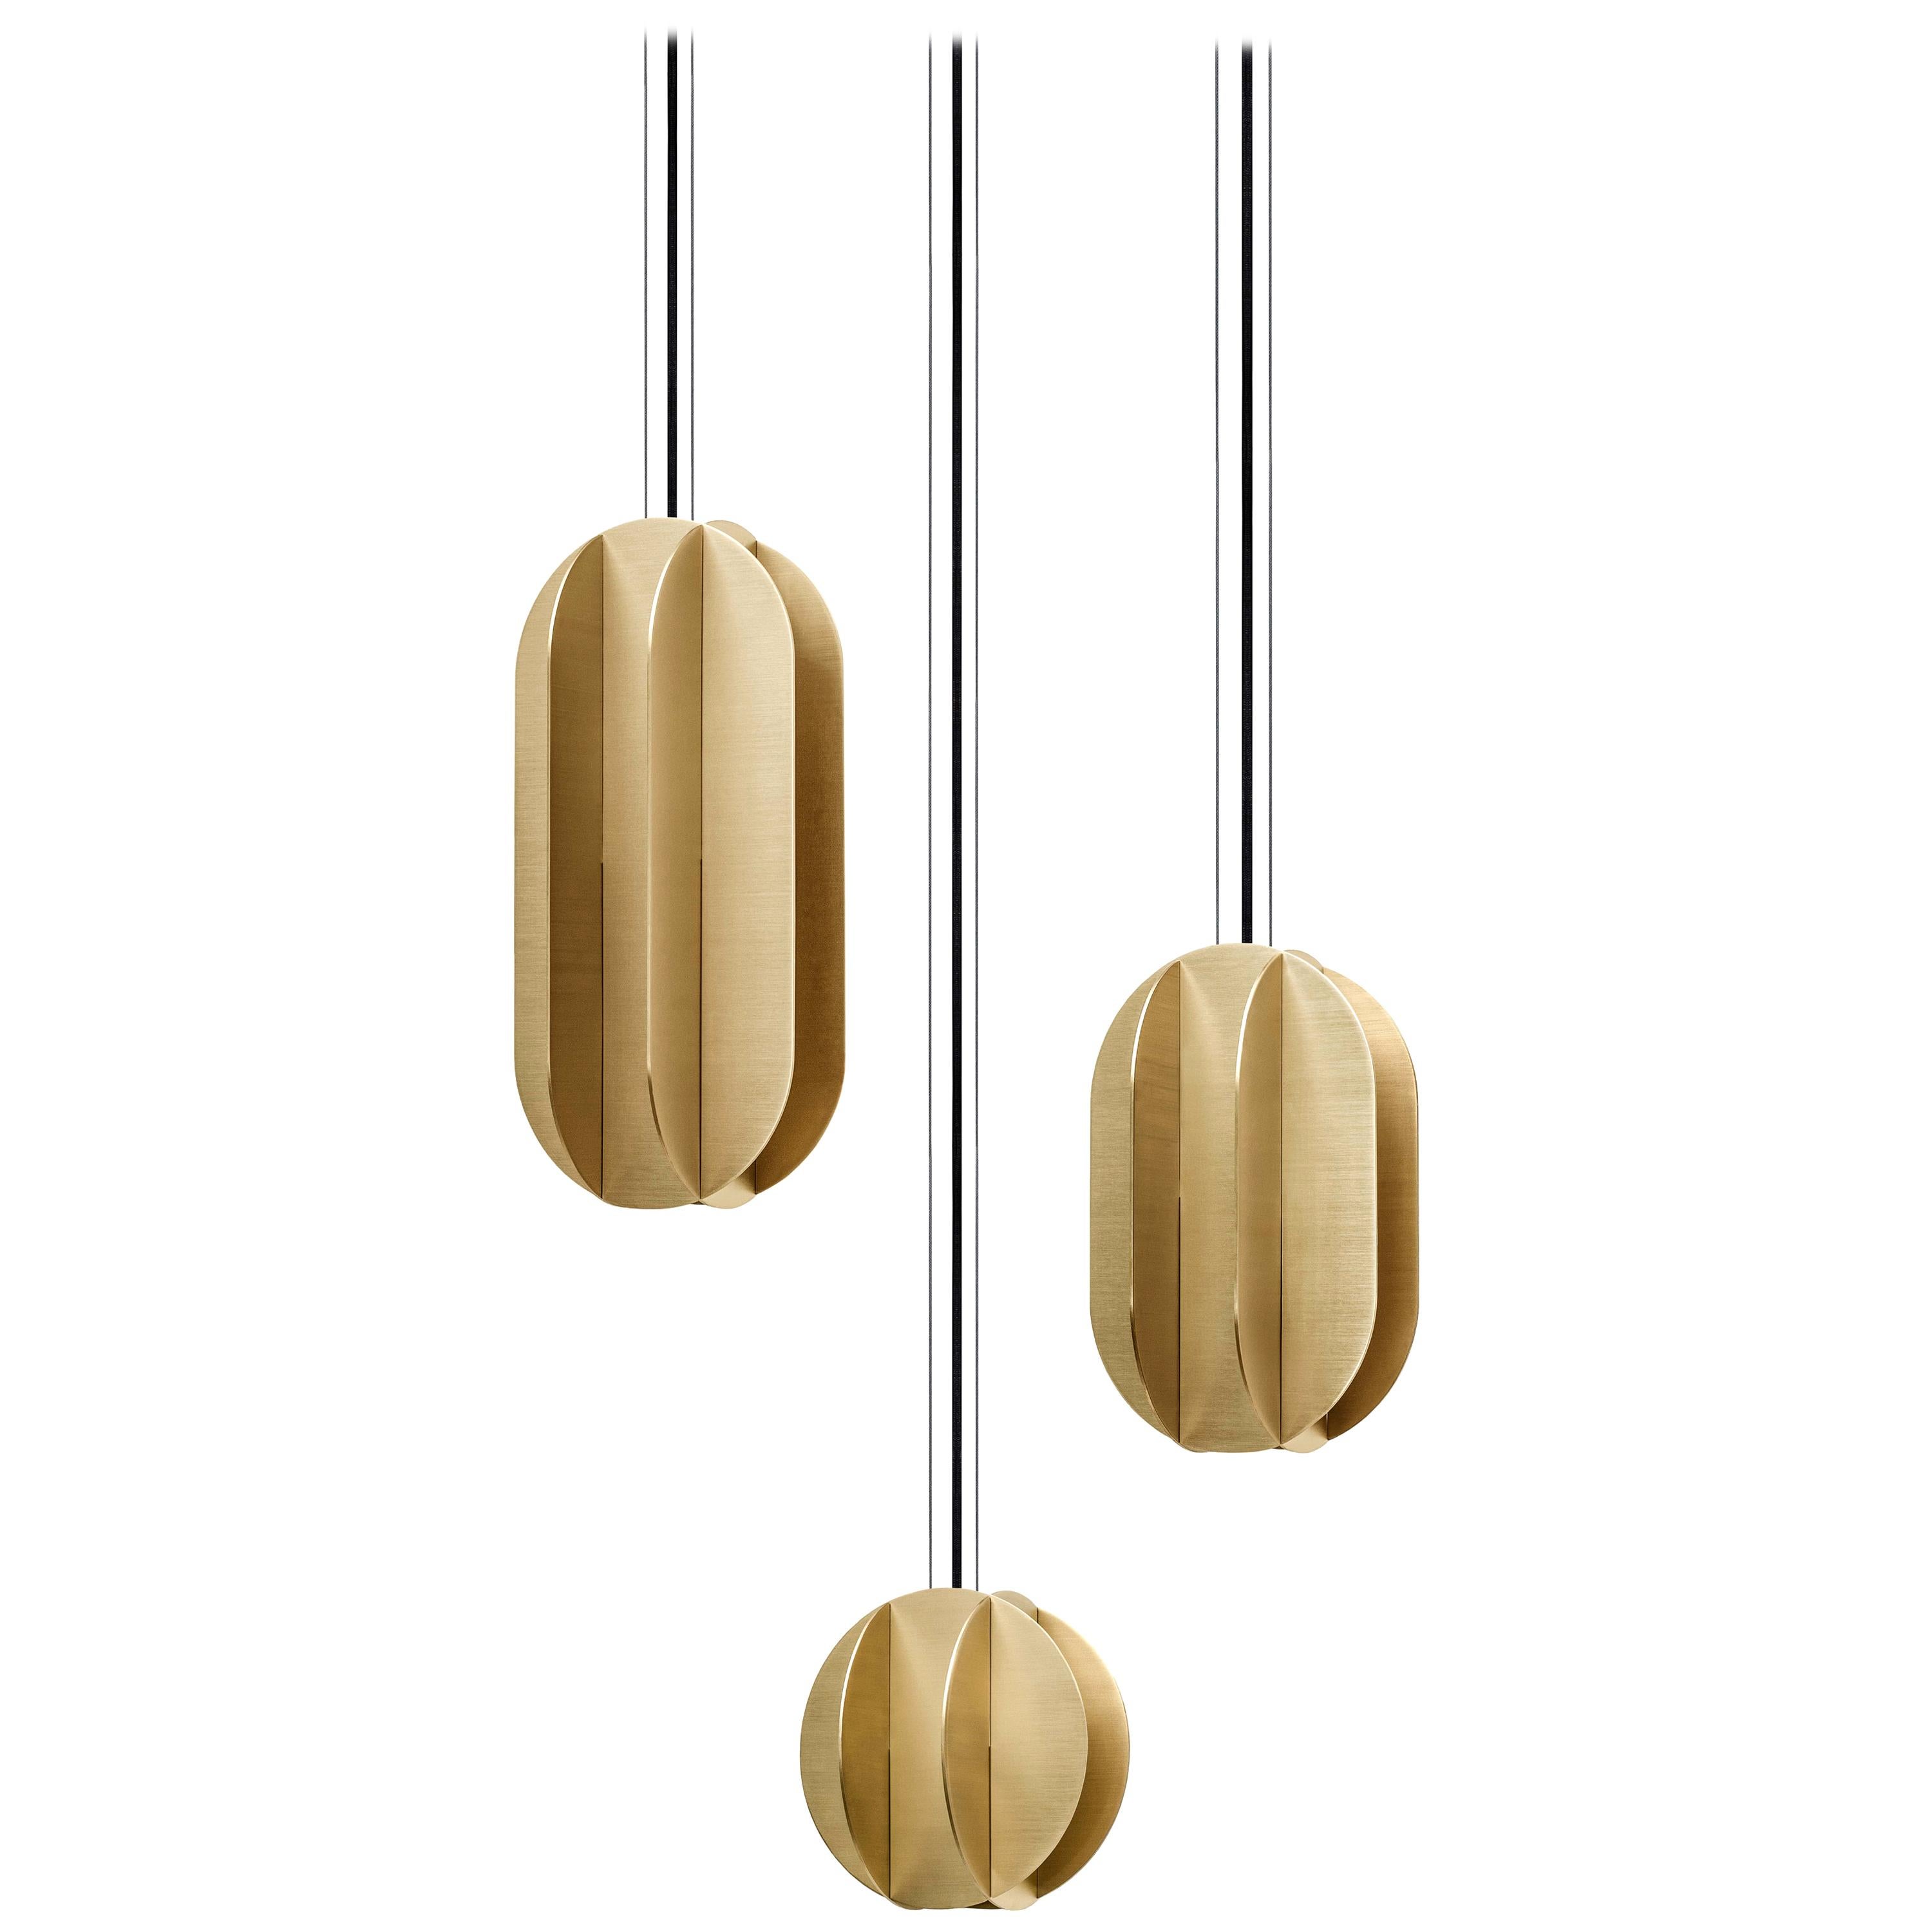 Set of Three Contemporary Pendant Lamp El Lamps CS1 by Noom in Brass